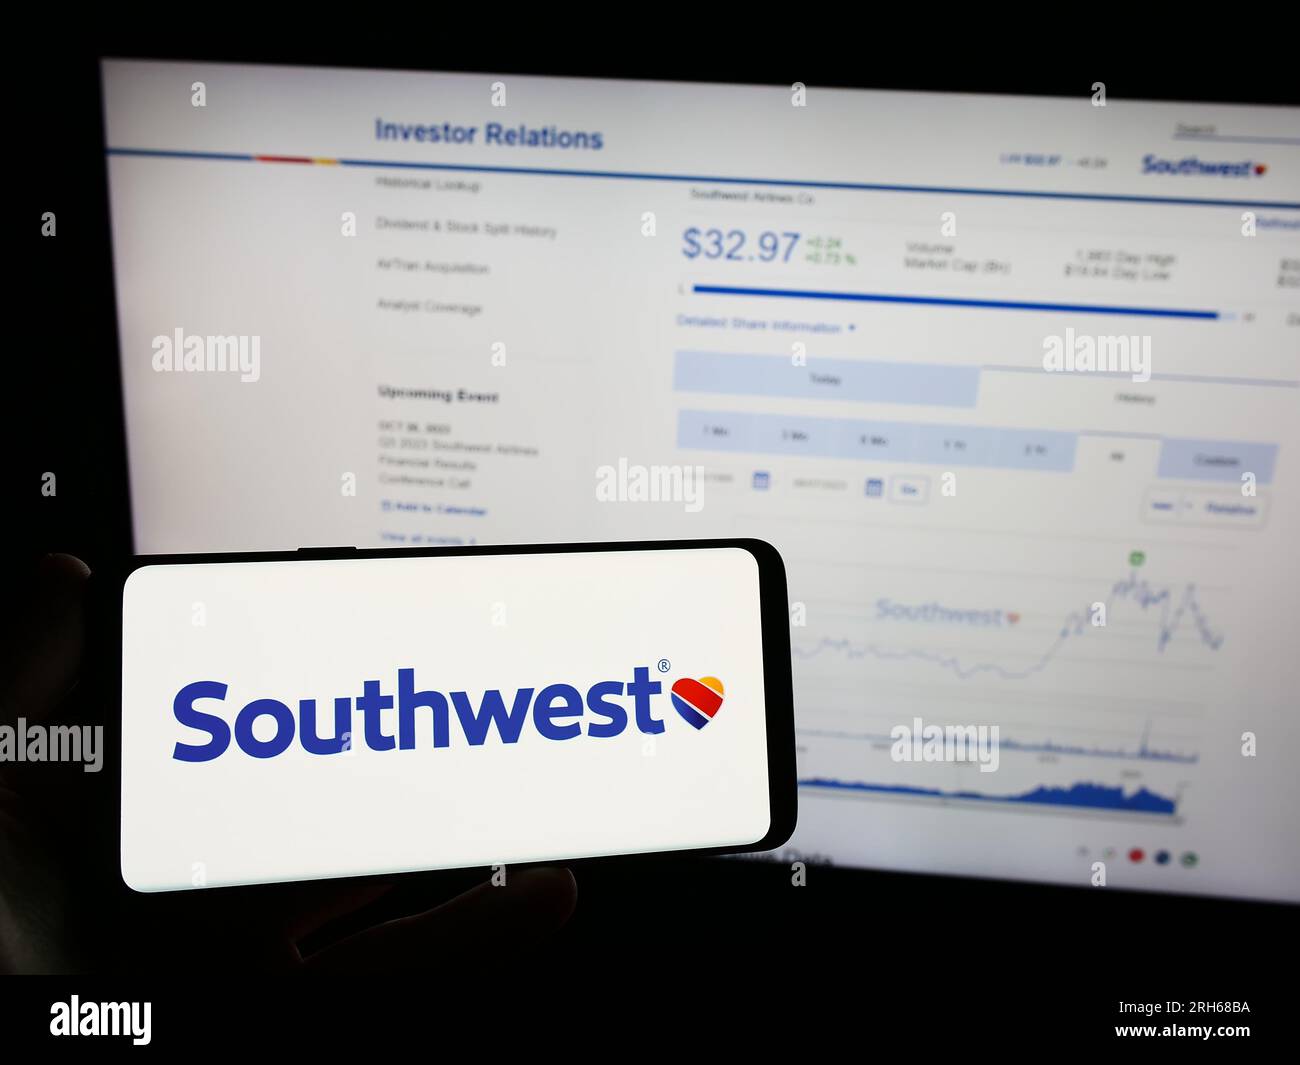 Person holding mobile phone with logo of American airline company Southwest Airlines Co. on screen in front of web page. Focus on phone display. Stock Photo